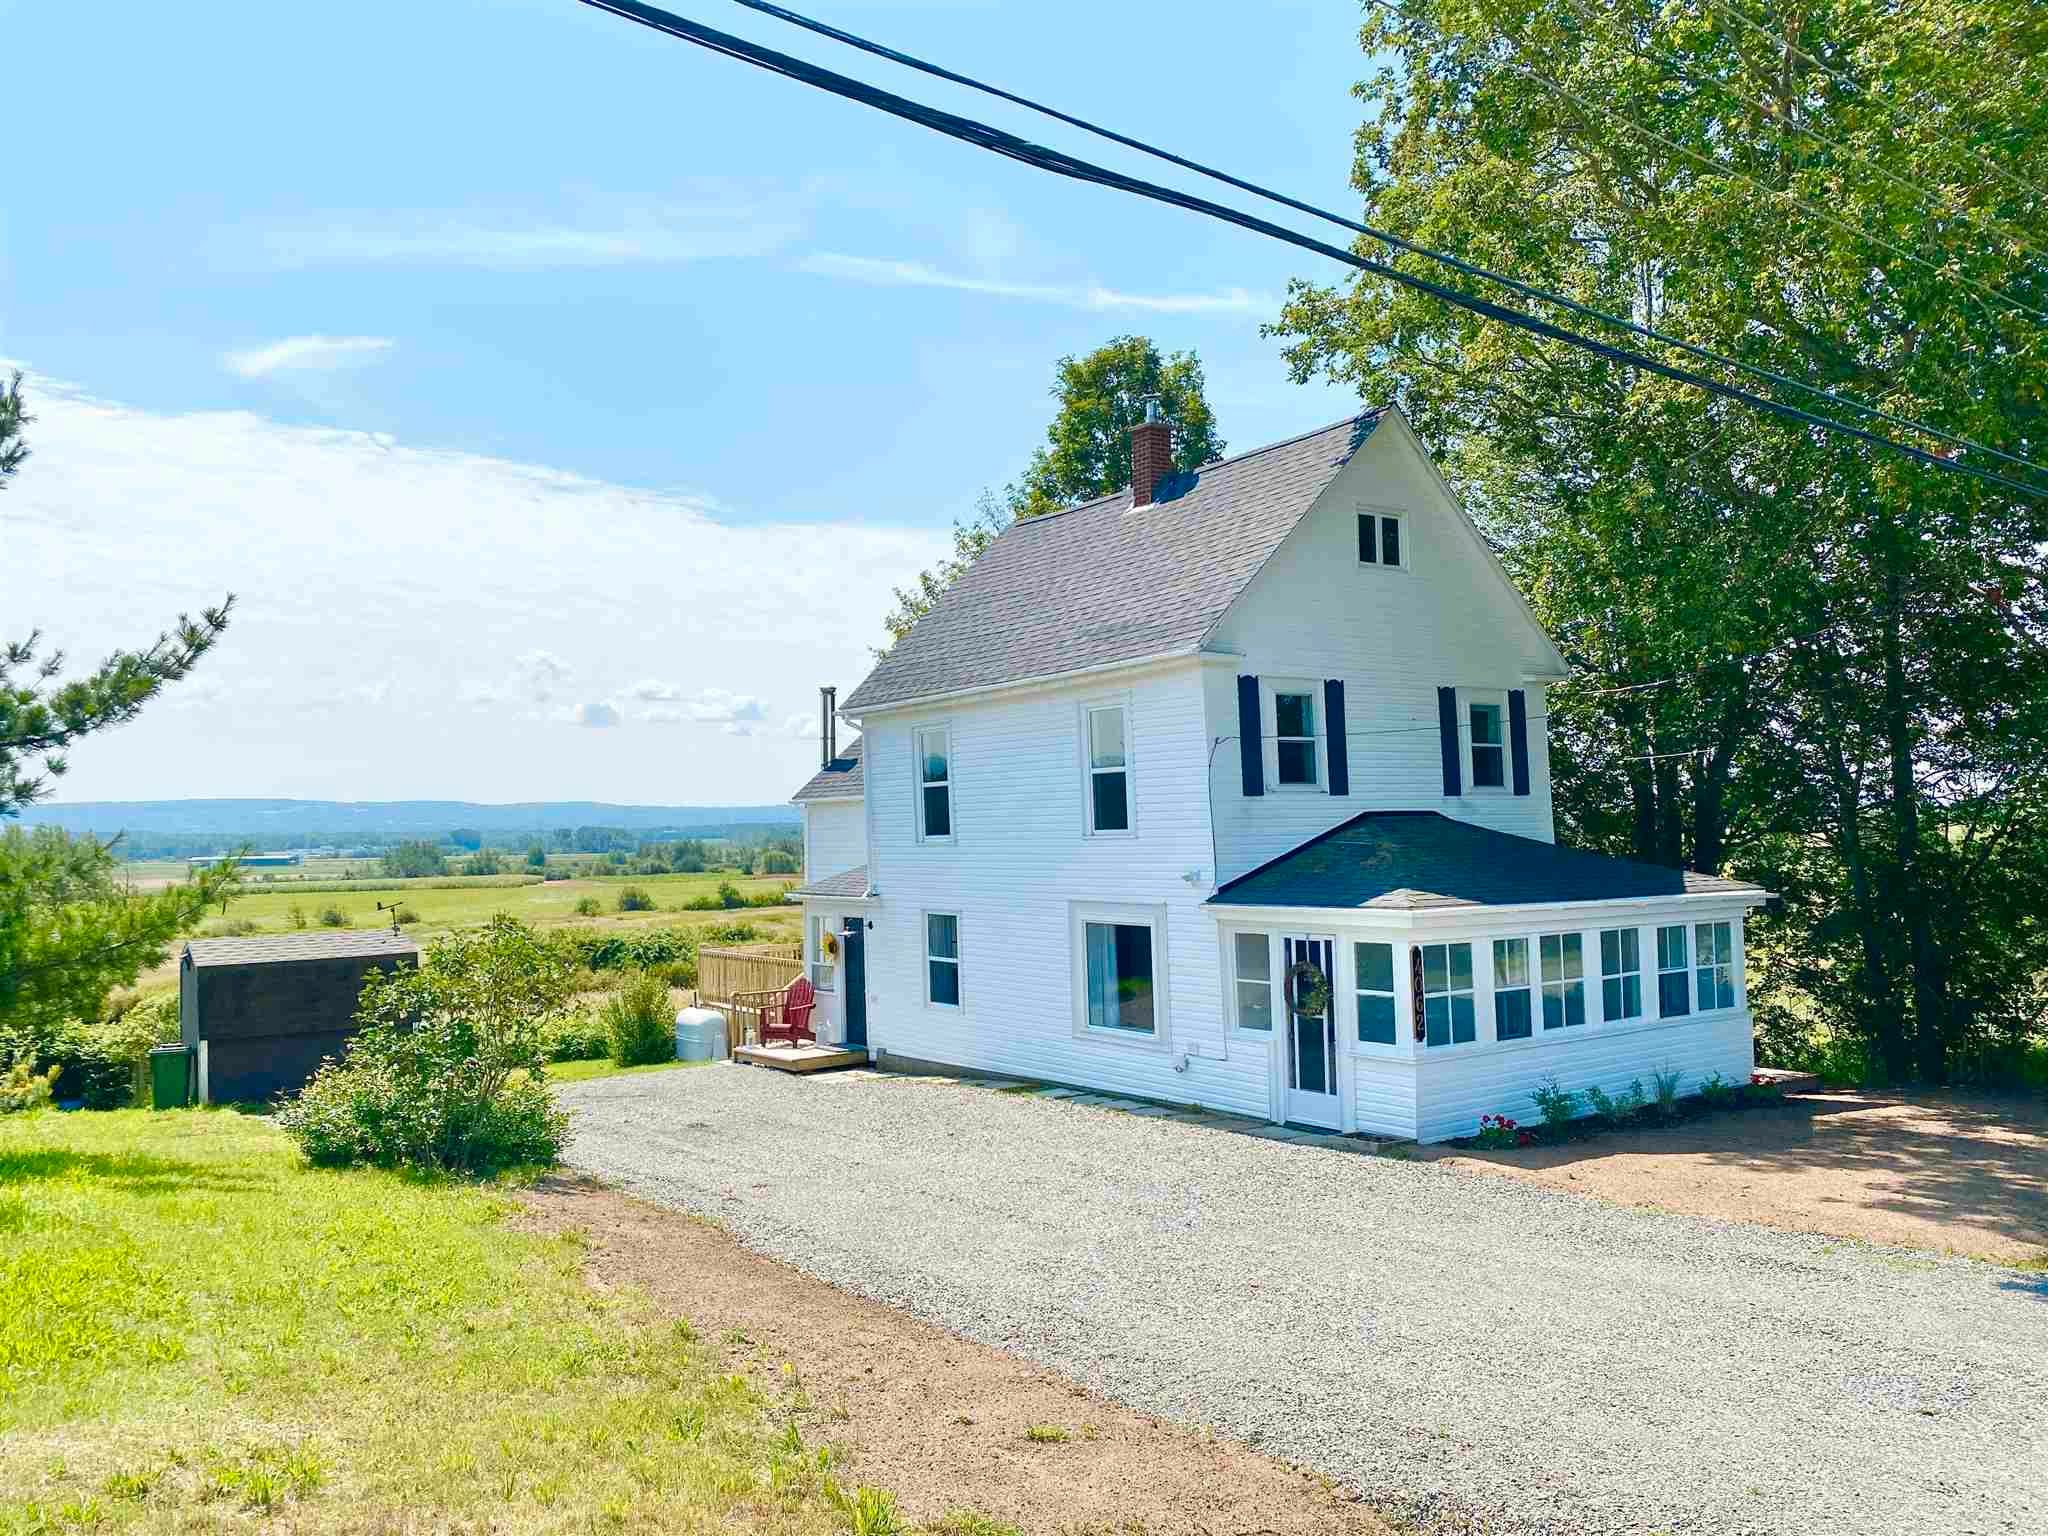 Main Photo: 4062 Brooklyn Street in Somerset: 404-Kings County Residential for sale (Annapolis Valley)  : MLS®# 202120357